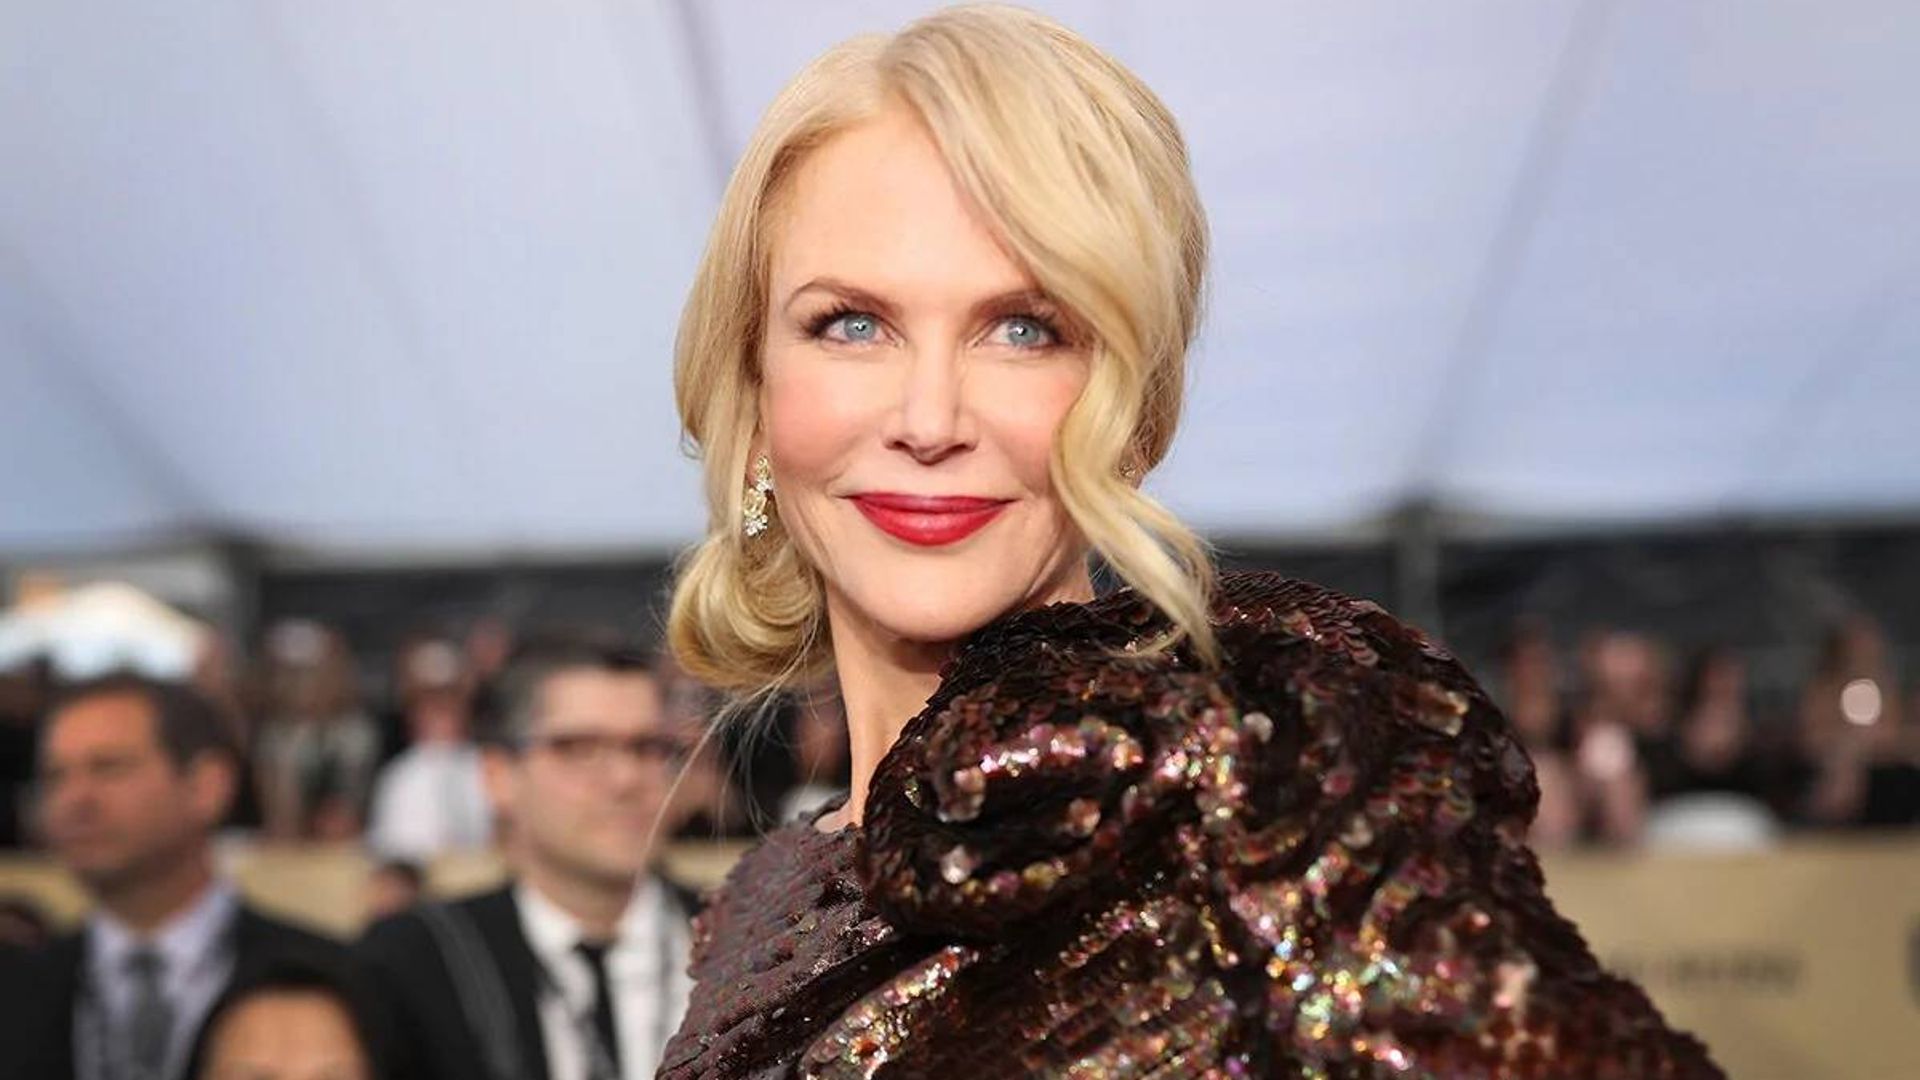 Nicole Kidman dazzles in a lavender dress – and fans are obsessed